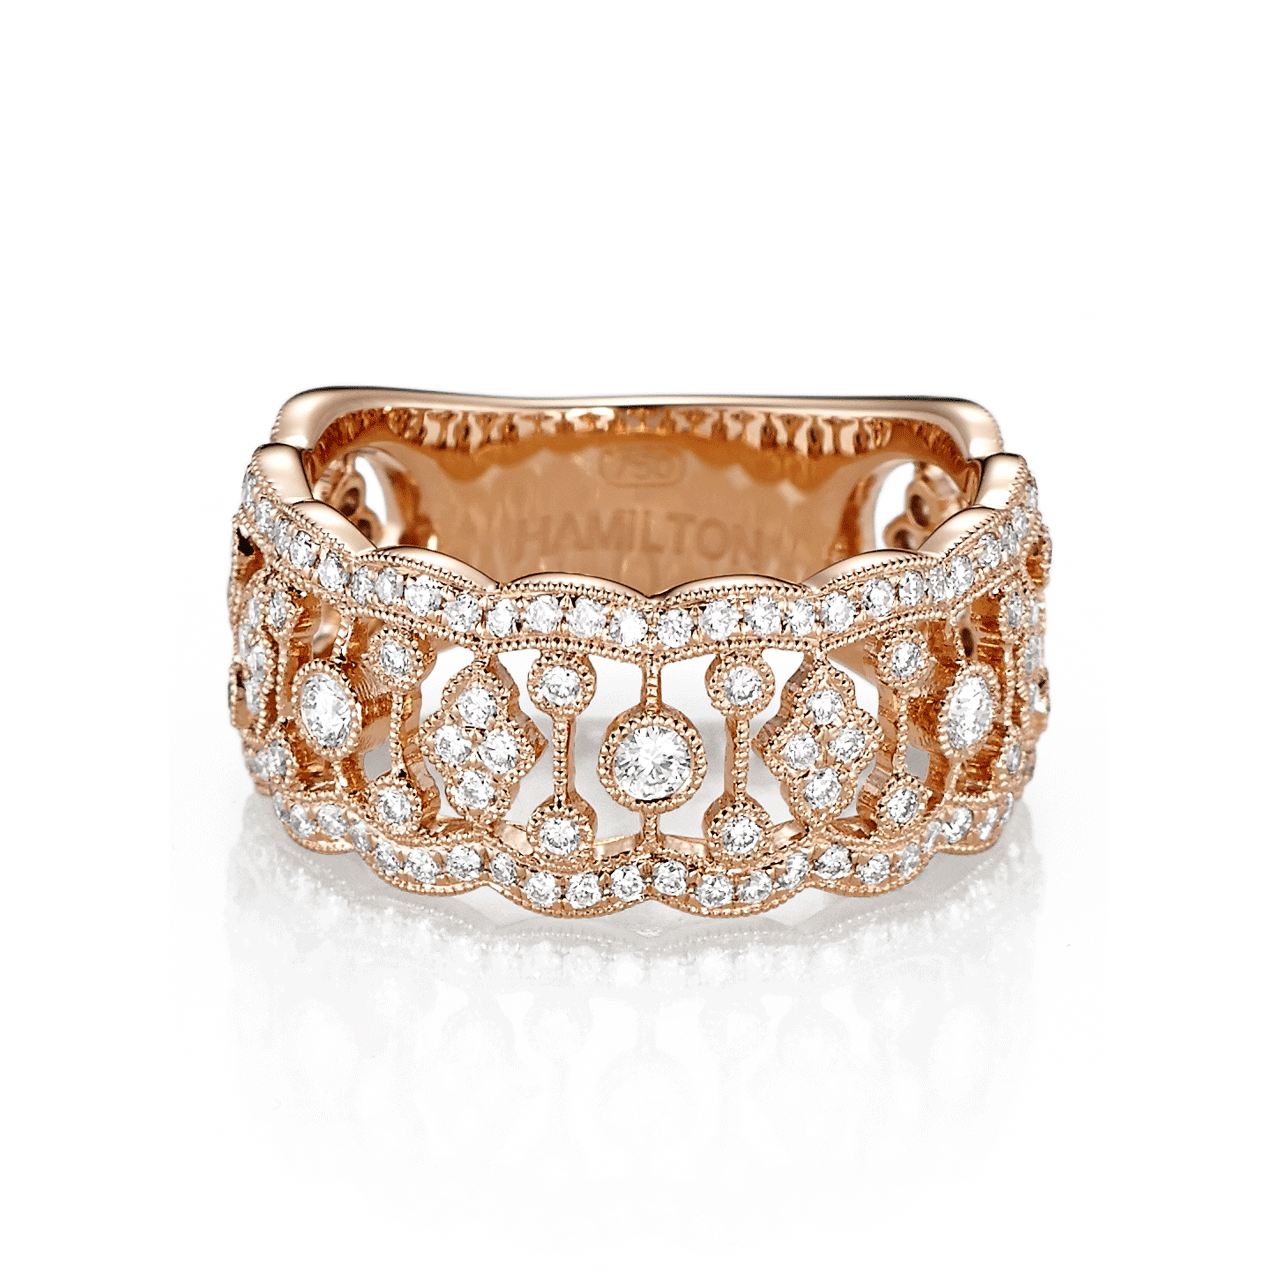 Heritage 18K Rose Gold and 133 Diamond Band